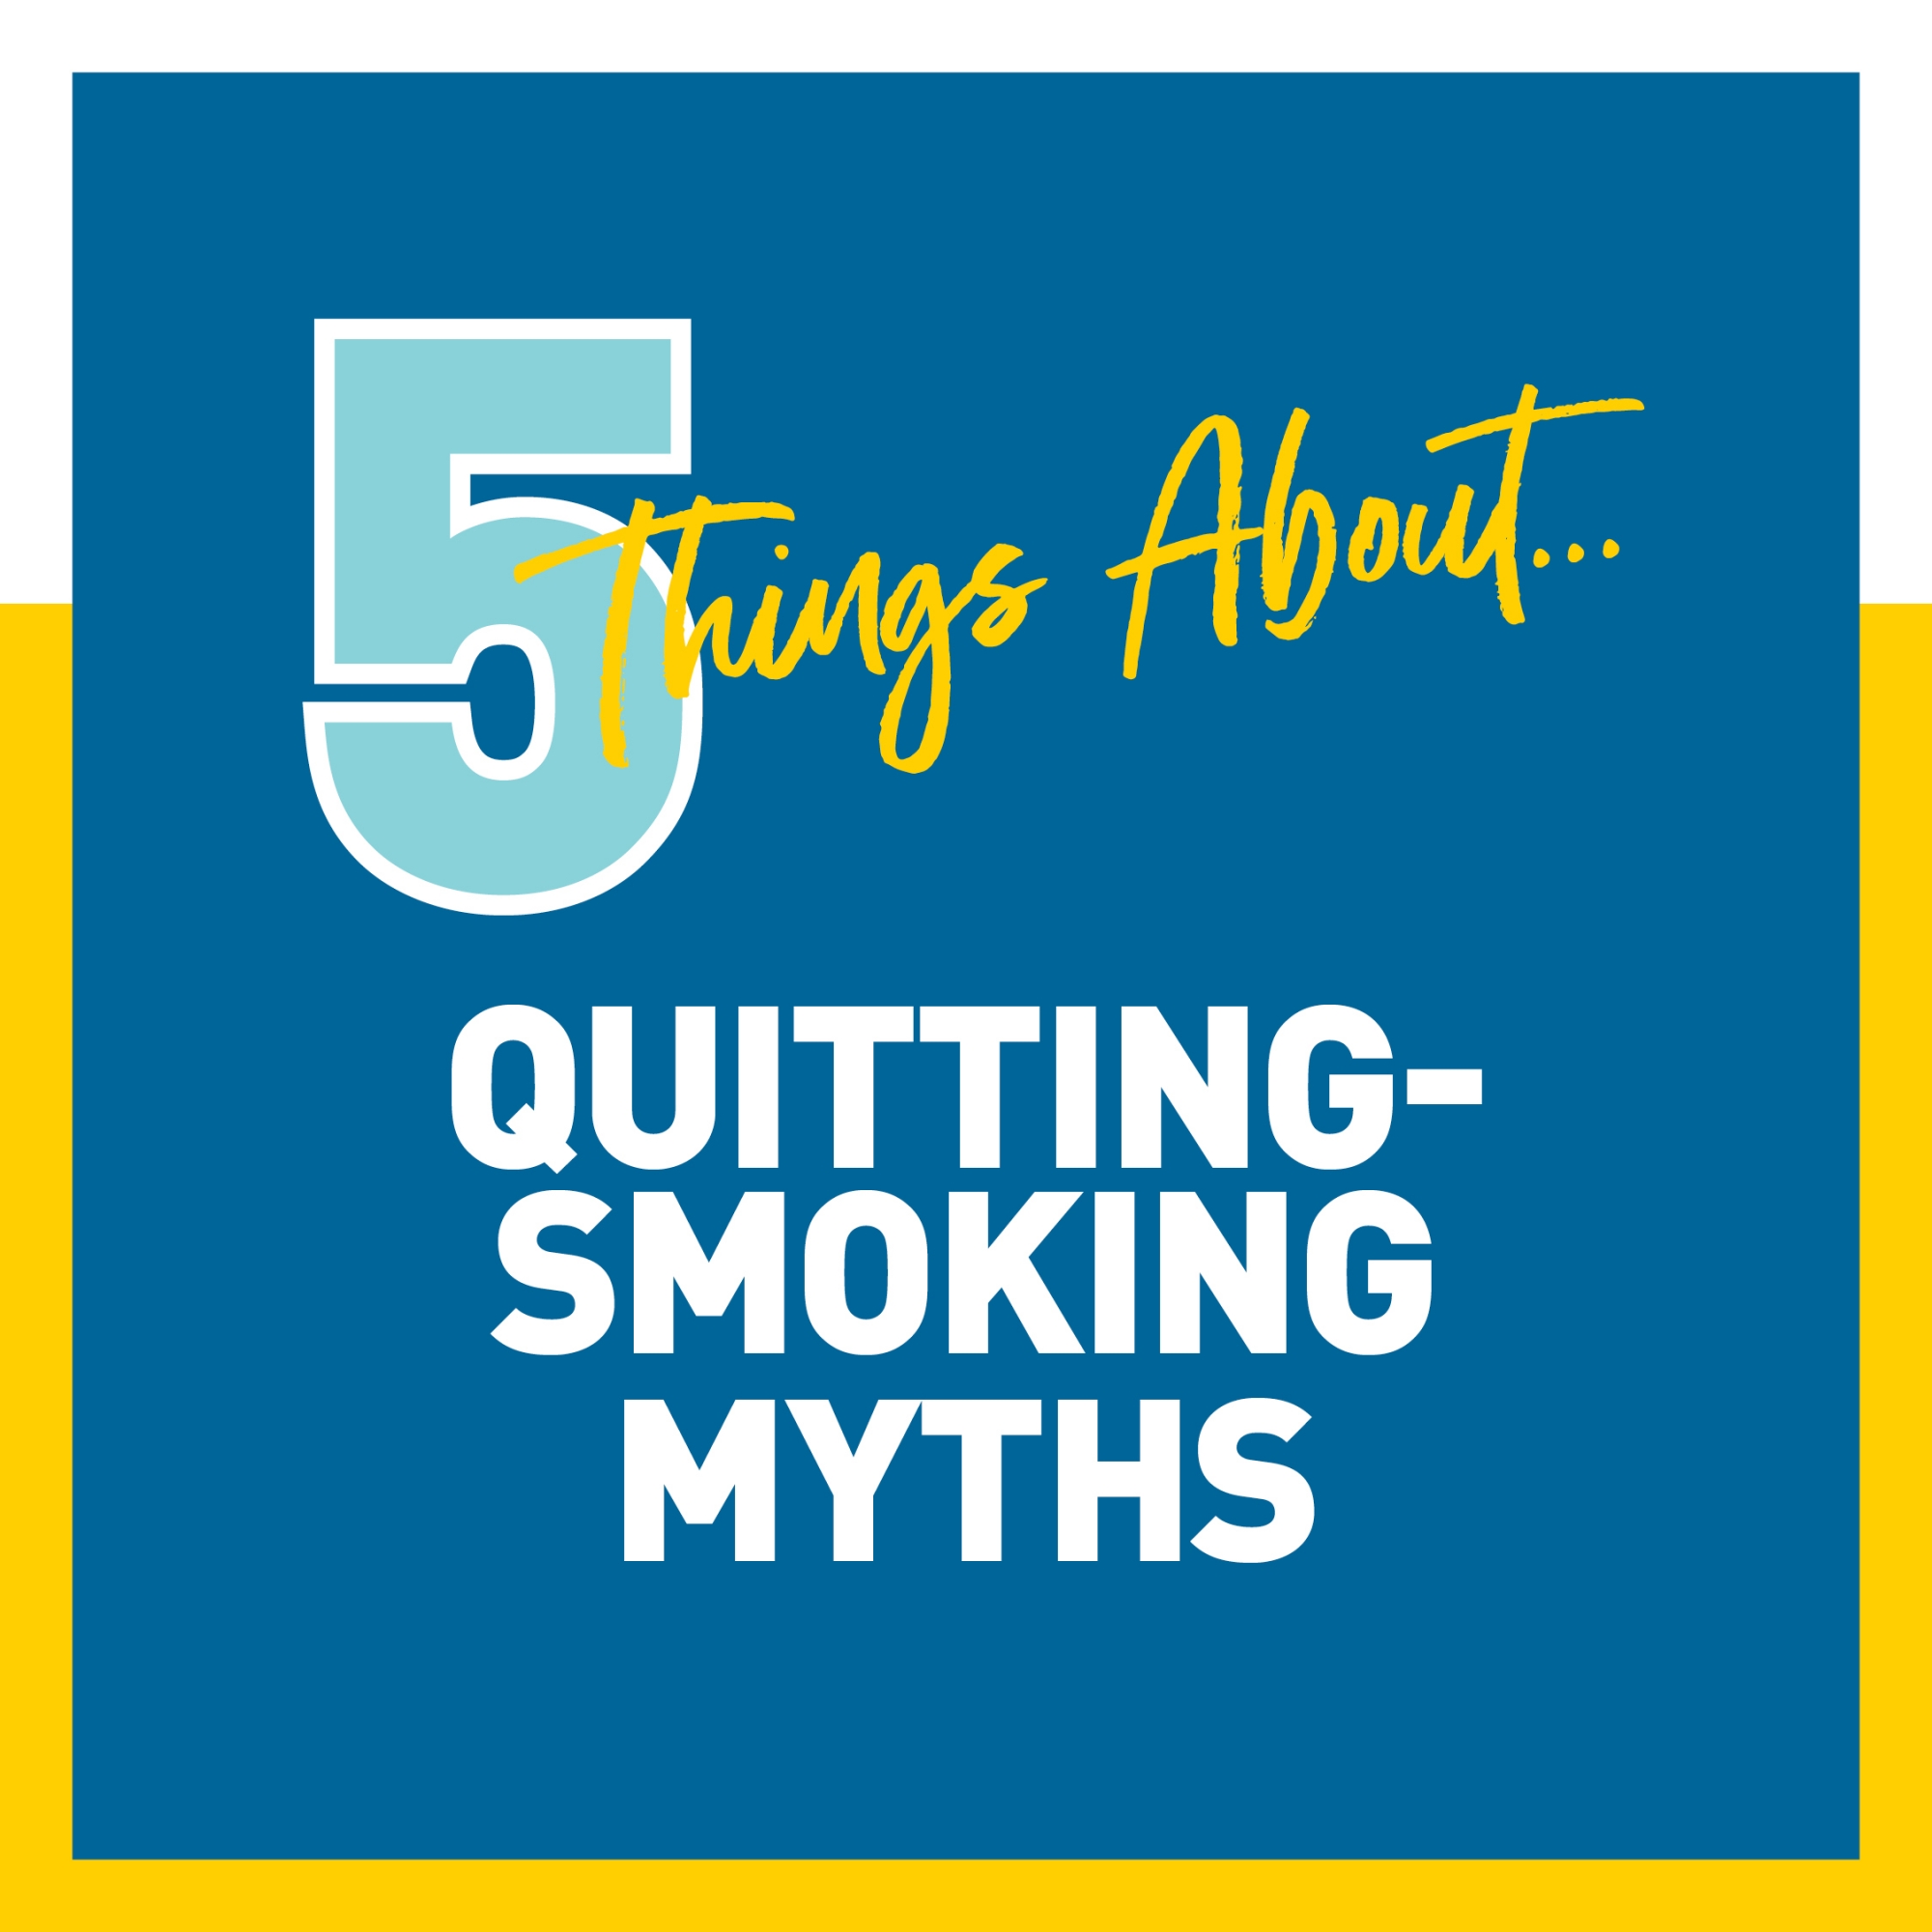 5 Things About Quitting Smoking Myths